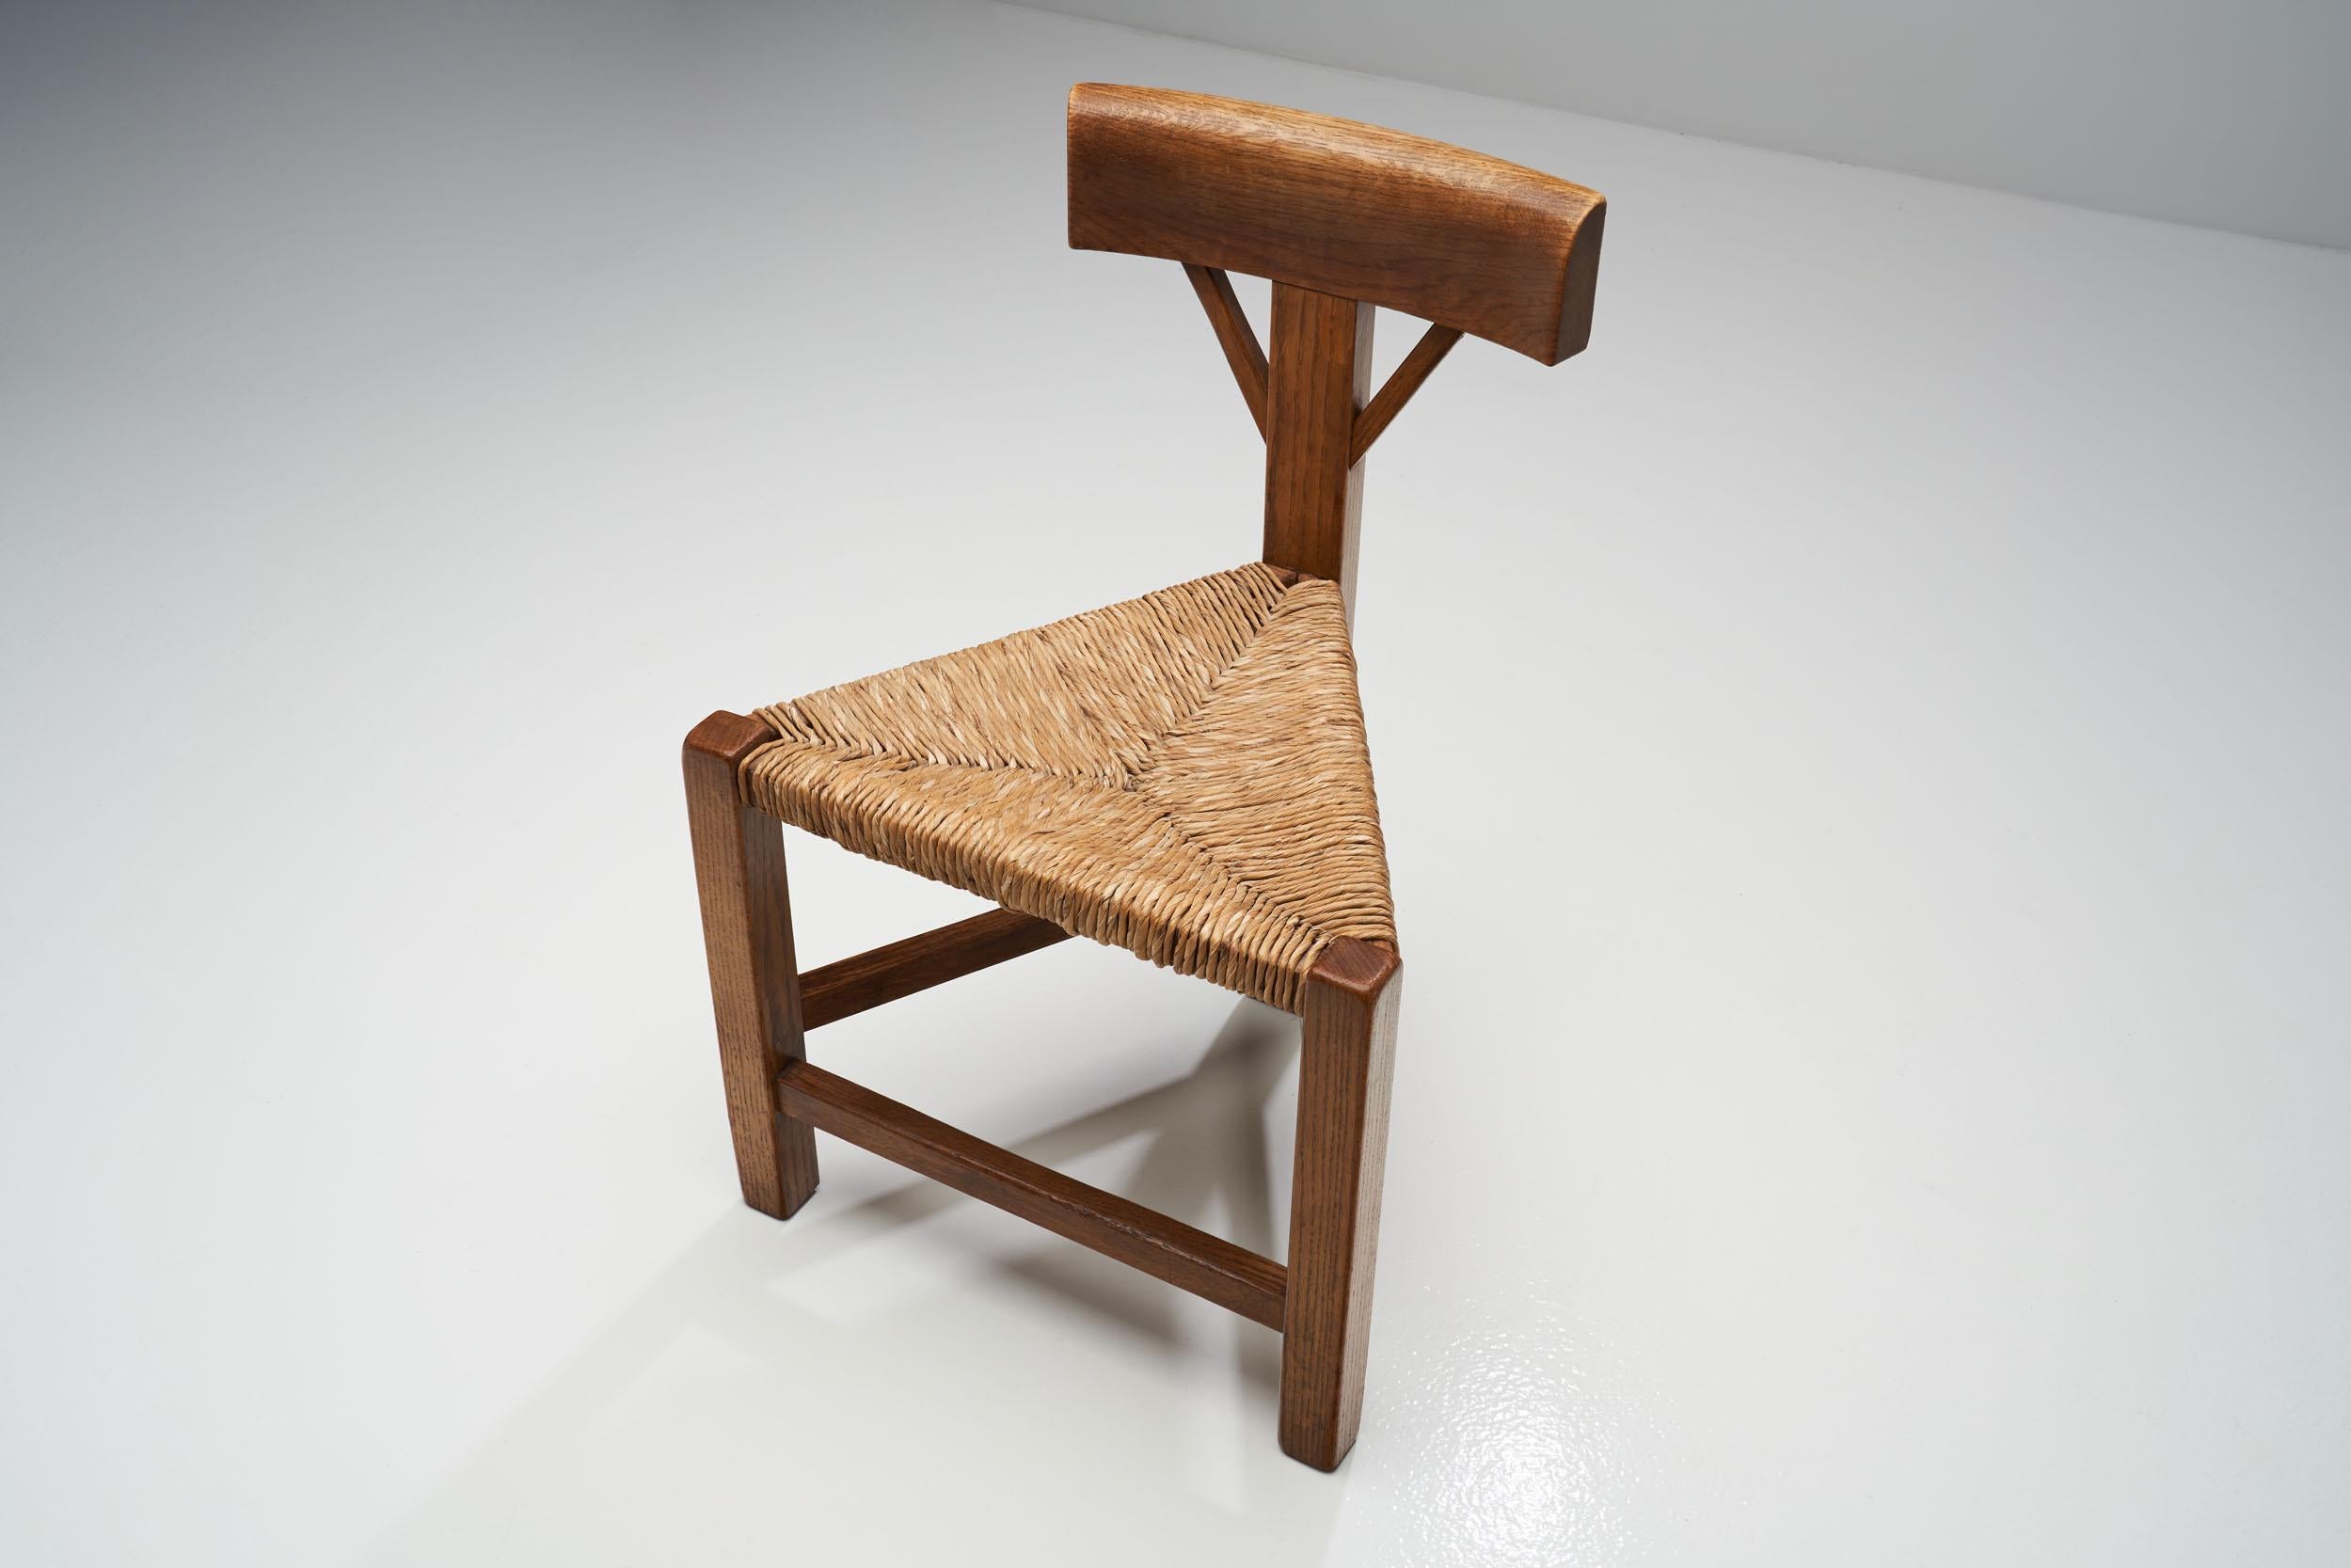 Mid-20th Century Triangular Chair in Oak and Cane, the Netherlands, circa 1960s-1970s